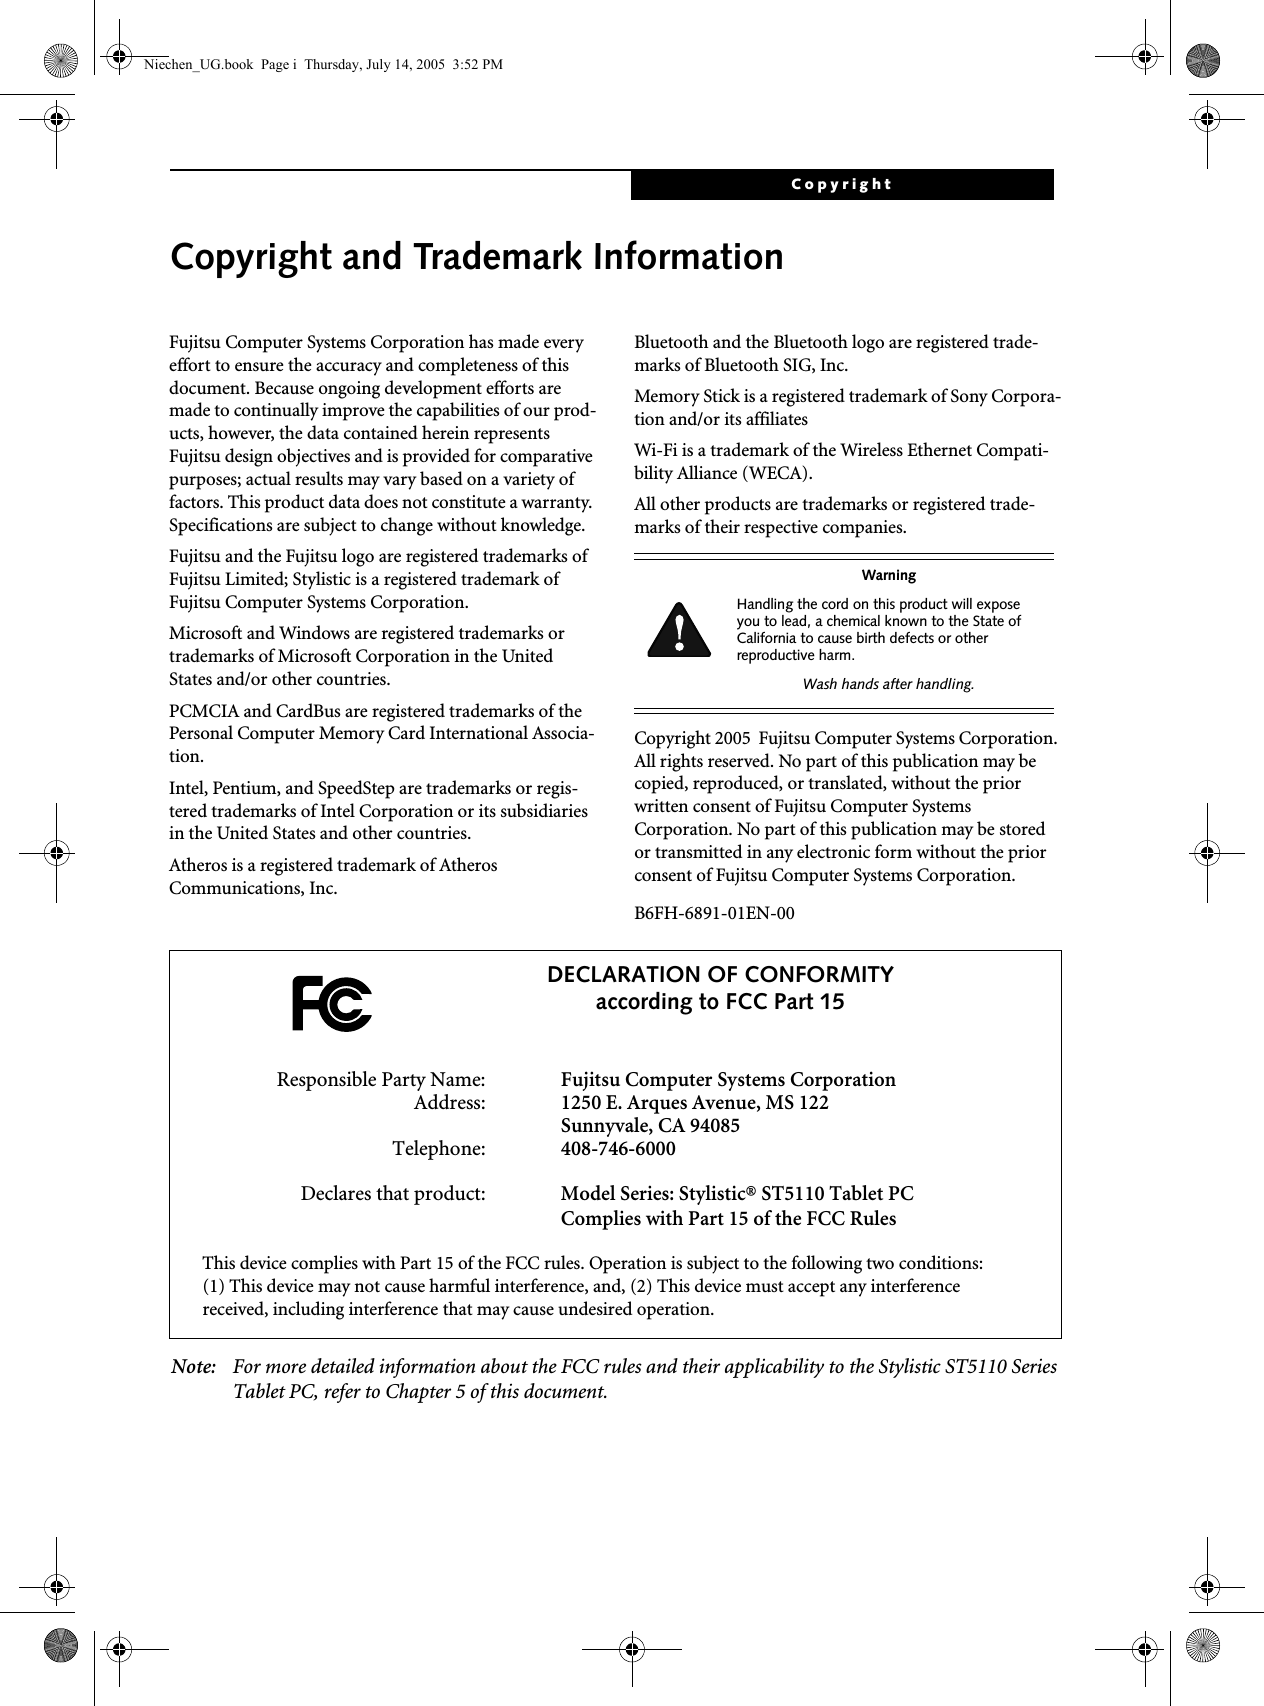 CopyrightCopyright and Trademark InformationFujitsu Computer Systems Corporation has made every effort to ensure the accuracy and completeness of this document. Because ongoing development efforts are made to continually improve the capabilities of our prod-ucts, however, the data contained herein represents Fujitsu design objectives and is provided for comparative purposes; actual results may vary based on a variety of factors. This product data does not constitute a warranty. Specifications are subject to change without knowledge.Fujitsu and the Fujitsu logo are registered trademarks of Fujitsu Limited; Stylistic is a registered trademark of Fujitsu Computer Systems Corporation.Microsoft and Windows are registered trademarks or trademarks of Microsoft Corporation in the United States and/or other countries. PCMCIA and CardBus are registered trademarks of the Personal Computer Memory Card International Associa-tion.Intel, Pentium, and SpeedStep are trademarks or regis-tered trademarks of Intel Corporation or its subsidiaries in the United States and other countries.Atheros is a registered trademark of Atheros Communications, Inc.Bluetooth and the Bluetooth logo are registered trade-marks of Bluetooth SIG, Inc.Memory Stick is a registered trademark of Sony Corpora-tion and/or its affiliatesWi-Fi is a trademark of the Wireless Ethernet Compati-bility Alliance (WECA).All other products are trademarks or registered trade-marks of their respective companies. Copyright 2005  Fujitsu Computer Systems Corporation. All rights reserved. No part of this publication may be copied, reproduced, or translated, without the prior written consent of Fujitsu Computer Systems Corporation. No part of this publication may be stored or transmitted in any electronic form without the prior consent of Fujitsu Computer Systems Corporation.B6FH-6891-01EN-00 Note: For more detailed information about the FCC rules and their applicability to the Stylistic ST5110 Series Tablet PC, refer to Chapter 5 of this document.WarningHandling the cord on this product will expose you to lead, a chemical known to the State of California to cause birth defects or other reproductive harm. Wash hands after handling.DECLARATION OF CONFORMITYaccording to FCC Part 15Responsible Party Name: Fujitsu Computer Systems CorporationAddress: 1250 E. Arques Avenue, MS 122Sunnyvale, CA 94085Telephone: 408-746-6000Declares that product: Model Series: Stylistic® ST5110 Tablet PCComplies with Part 15 of the FCC RulesThis device complies with Part 15 of the FCC rules. Operation is subject to the following two conditions: (1) This device may not cause harmful interference, and, (2) This device must accept any interference received, including interference that may cause undesired operation.Niechen_UG.book  Page i  Thursday, July 14, 2005  3:52 PM